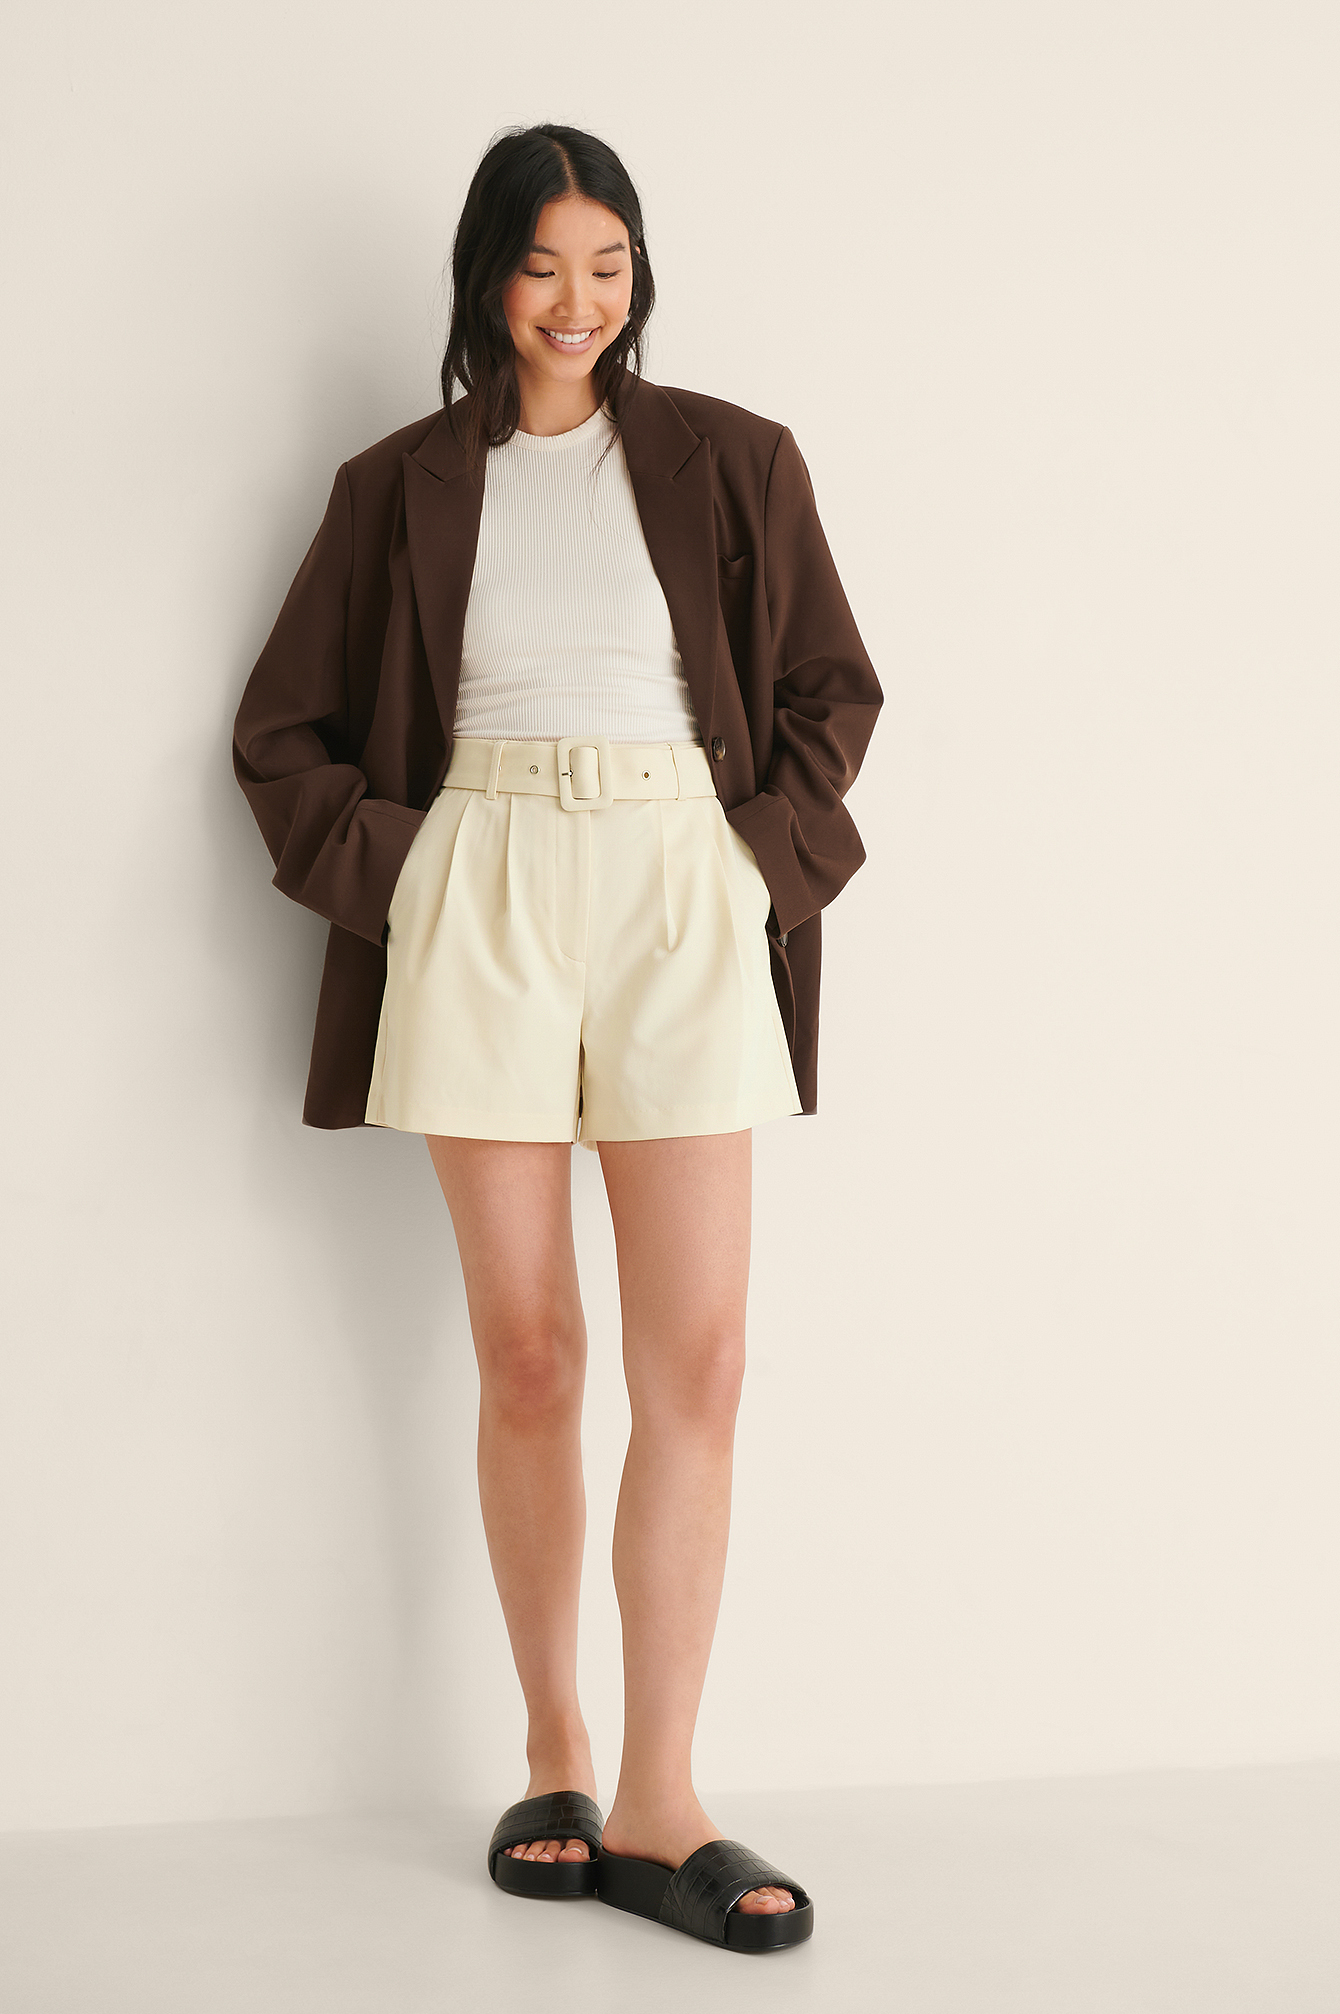 High Waist Belted Shorts Outfit.